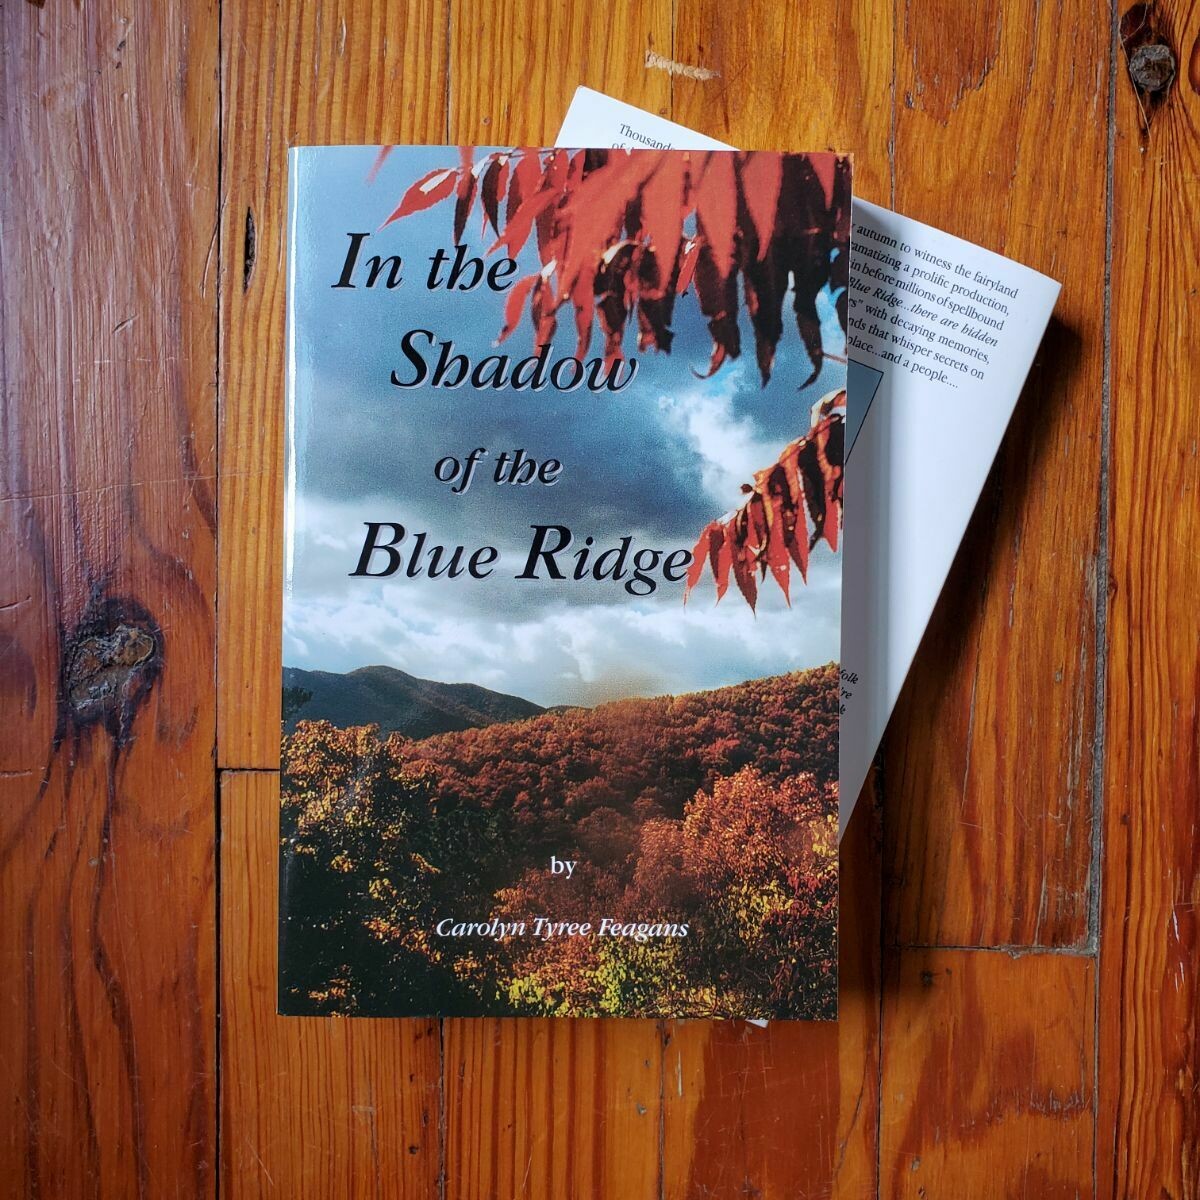 In The Shadow of the Blue Ridge by: Carolyn Tyree Feagans